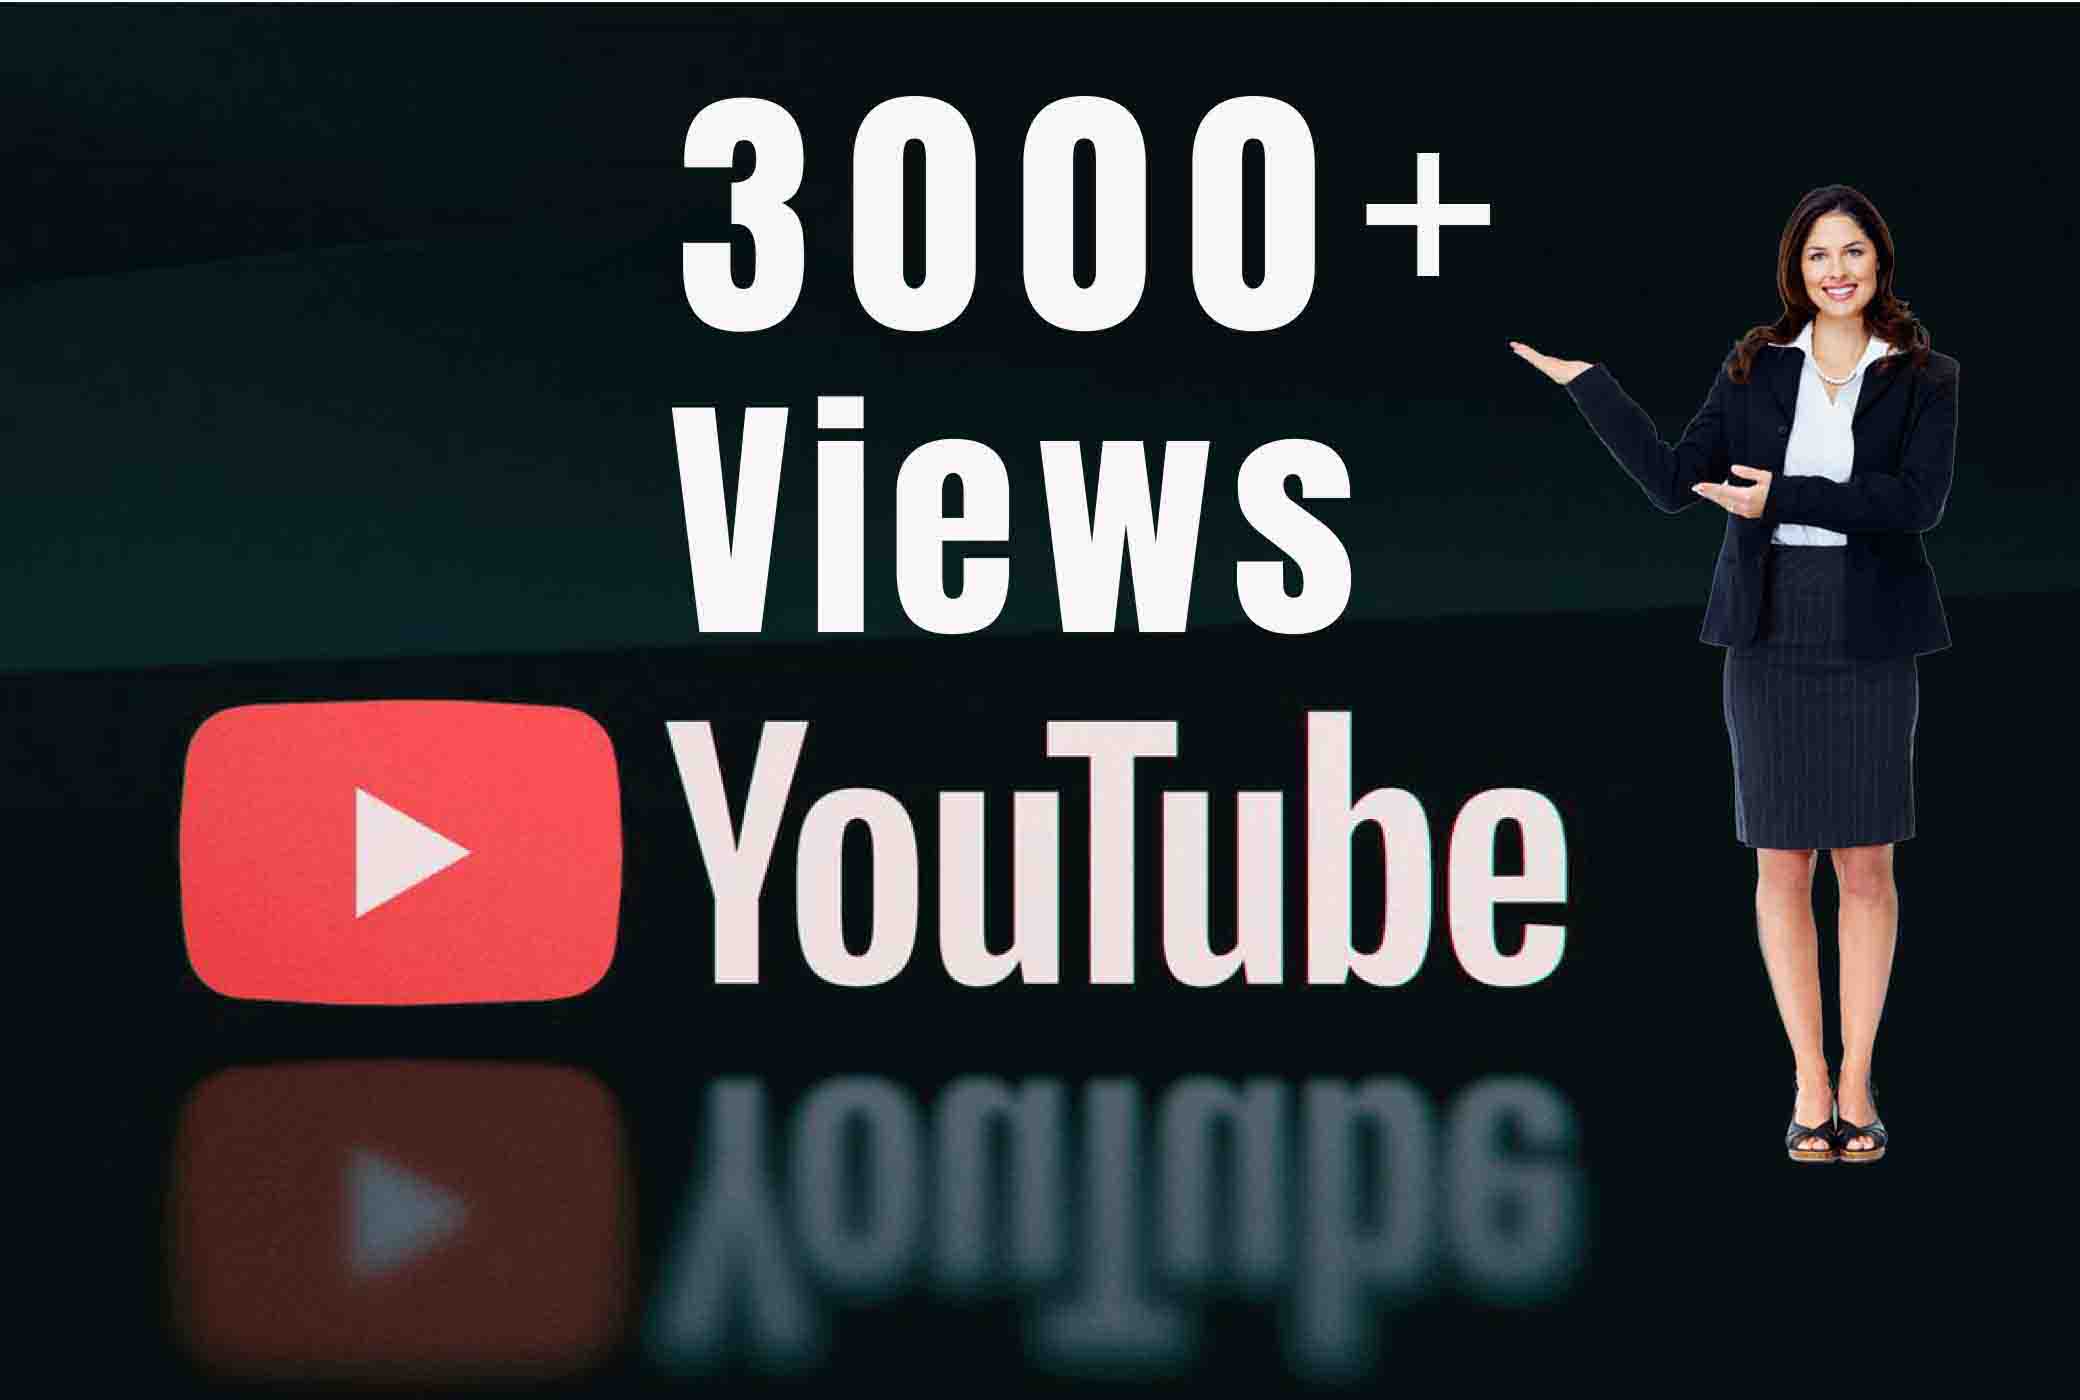 I will promote your video with 3000+ YOUTUBE VIEWS and 100 LIKES, guaranteed for life.